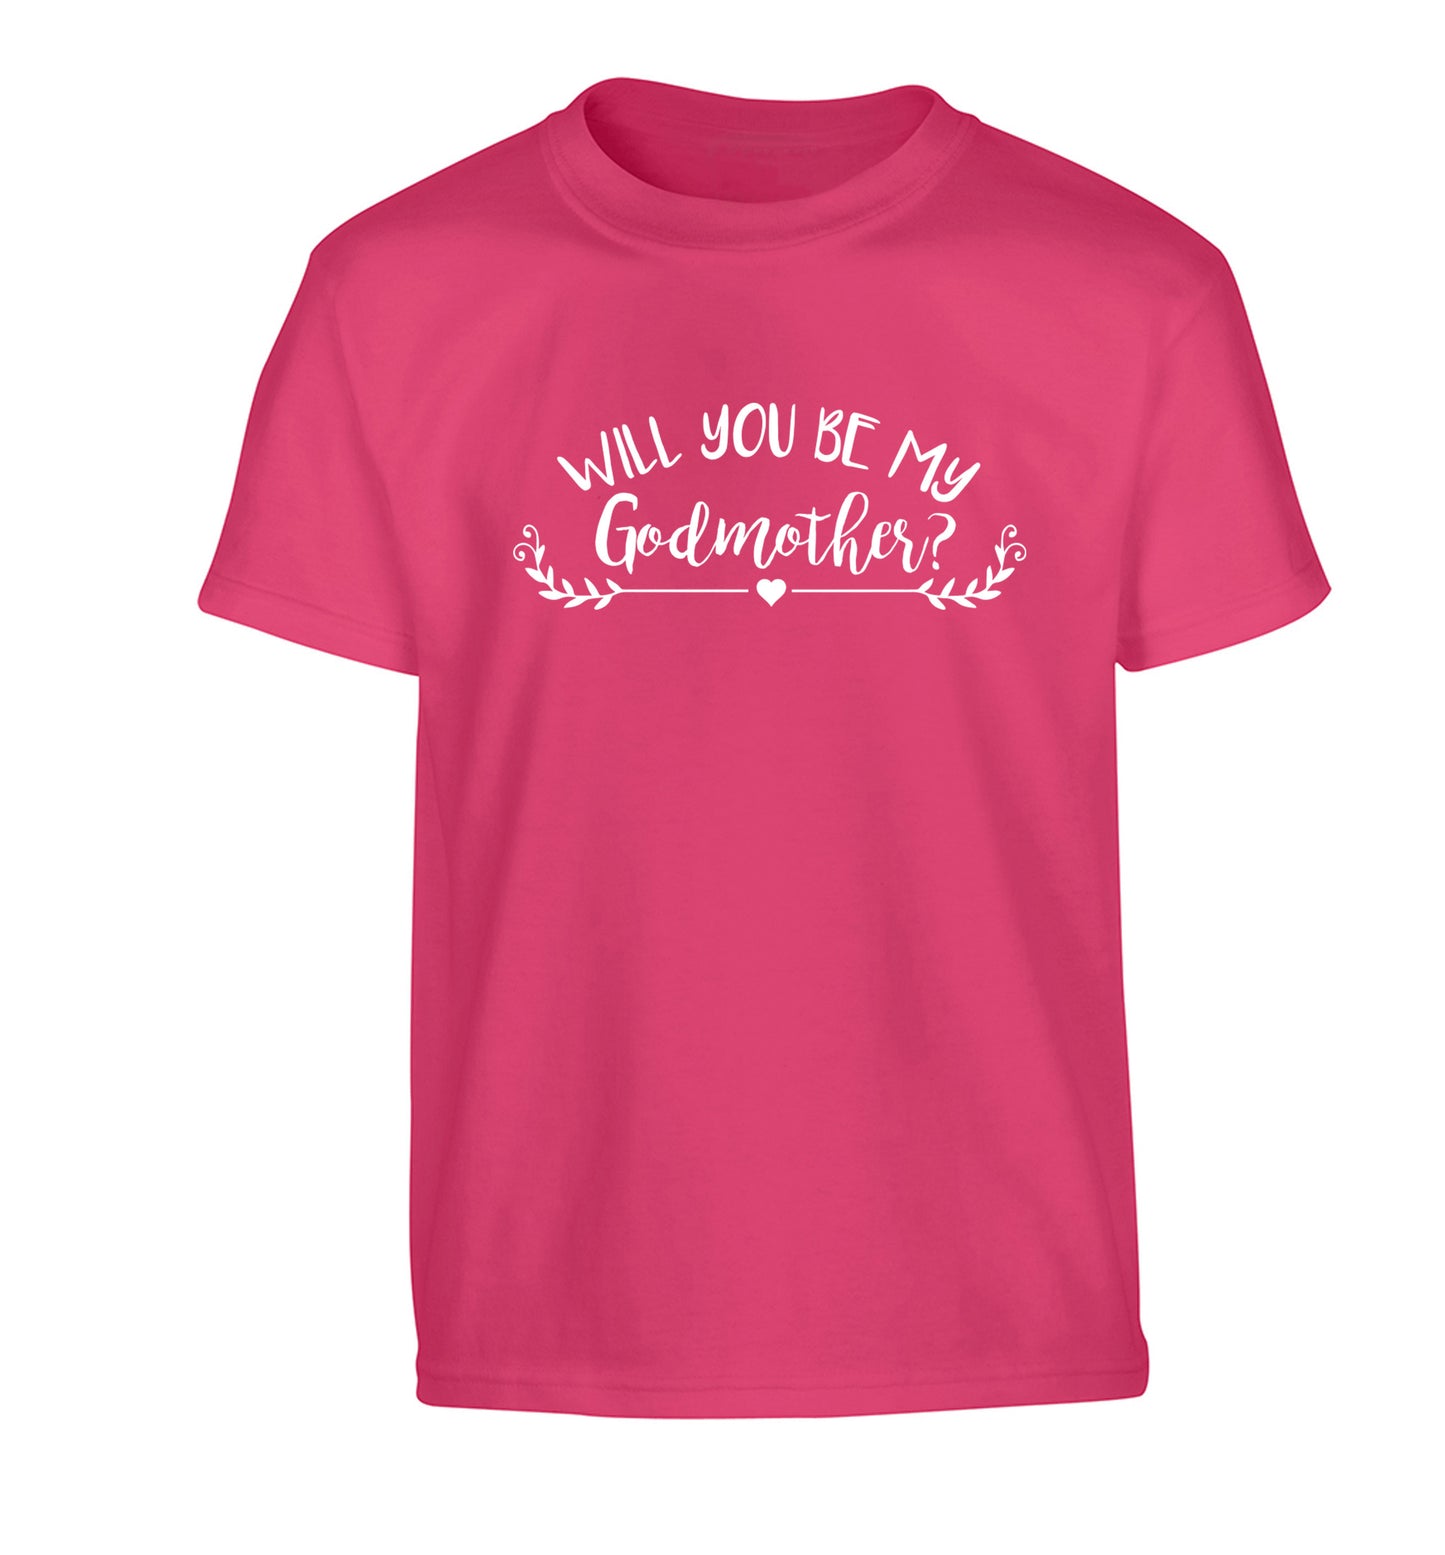 Will you be my godmother? Children's pink Tshirt 12-14 Years